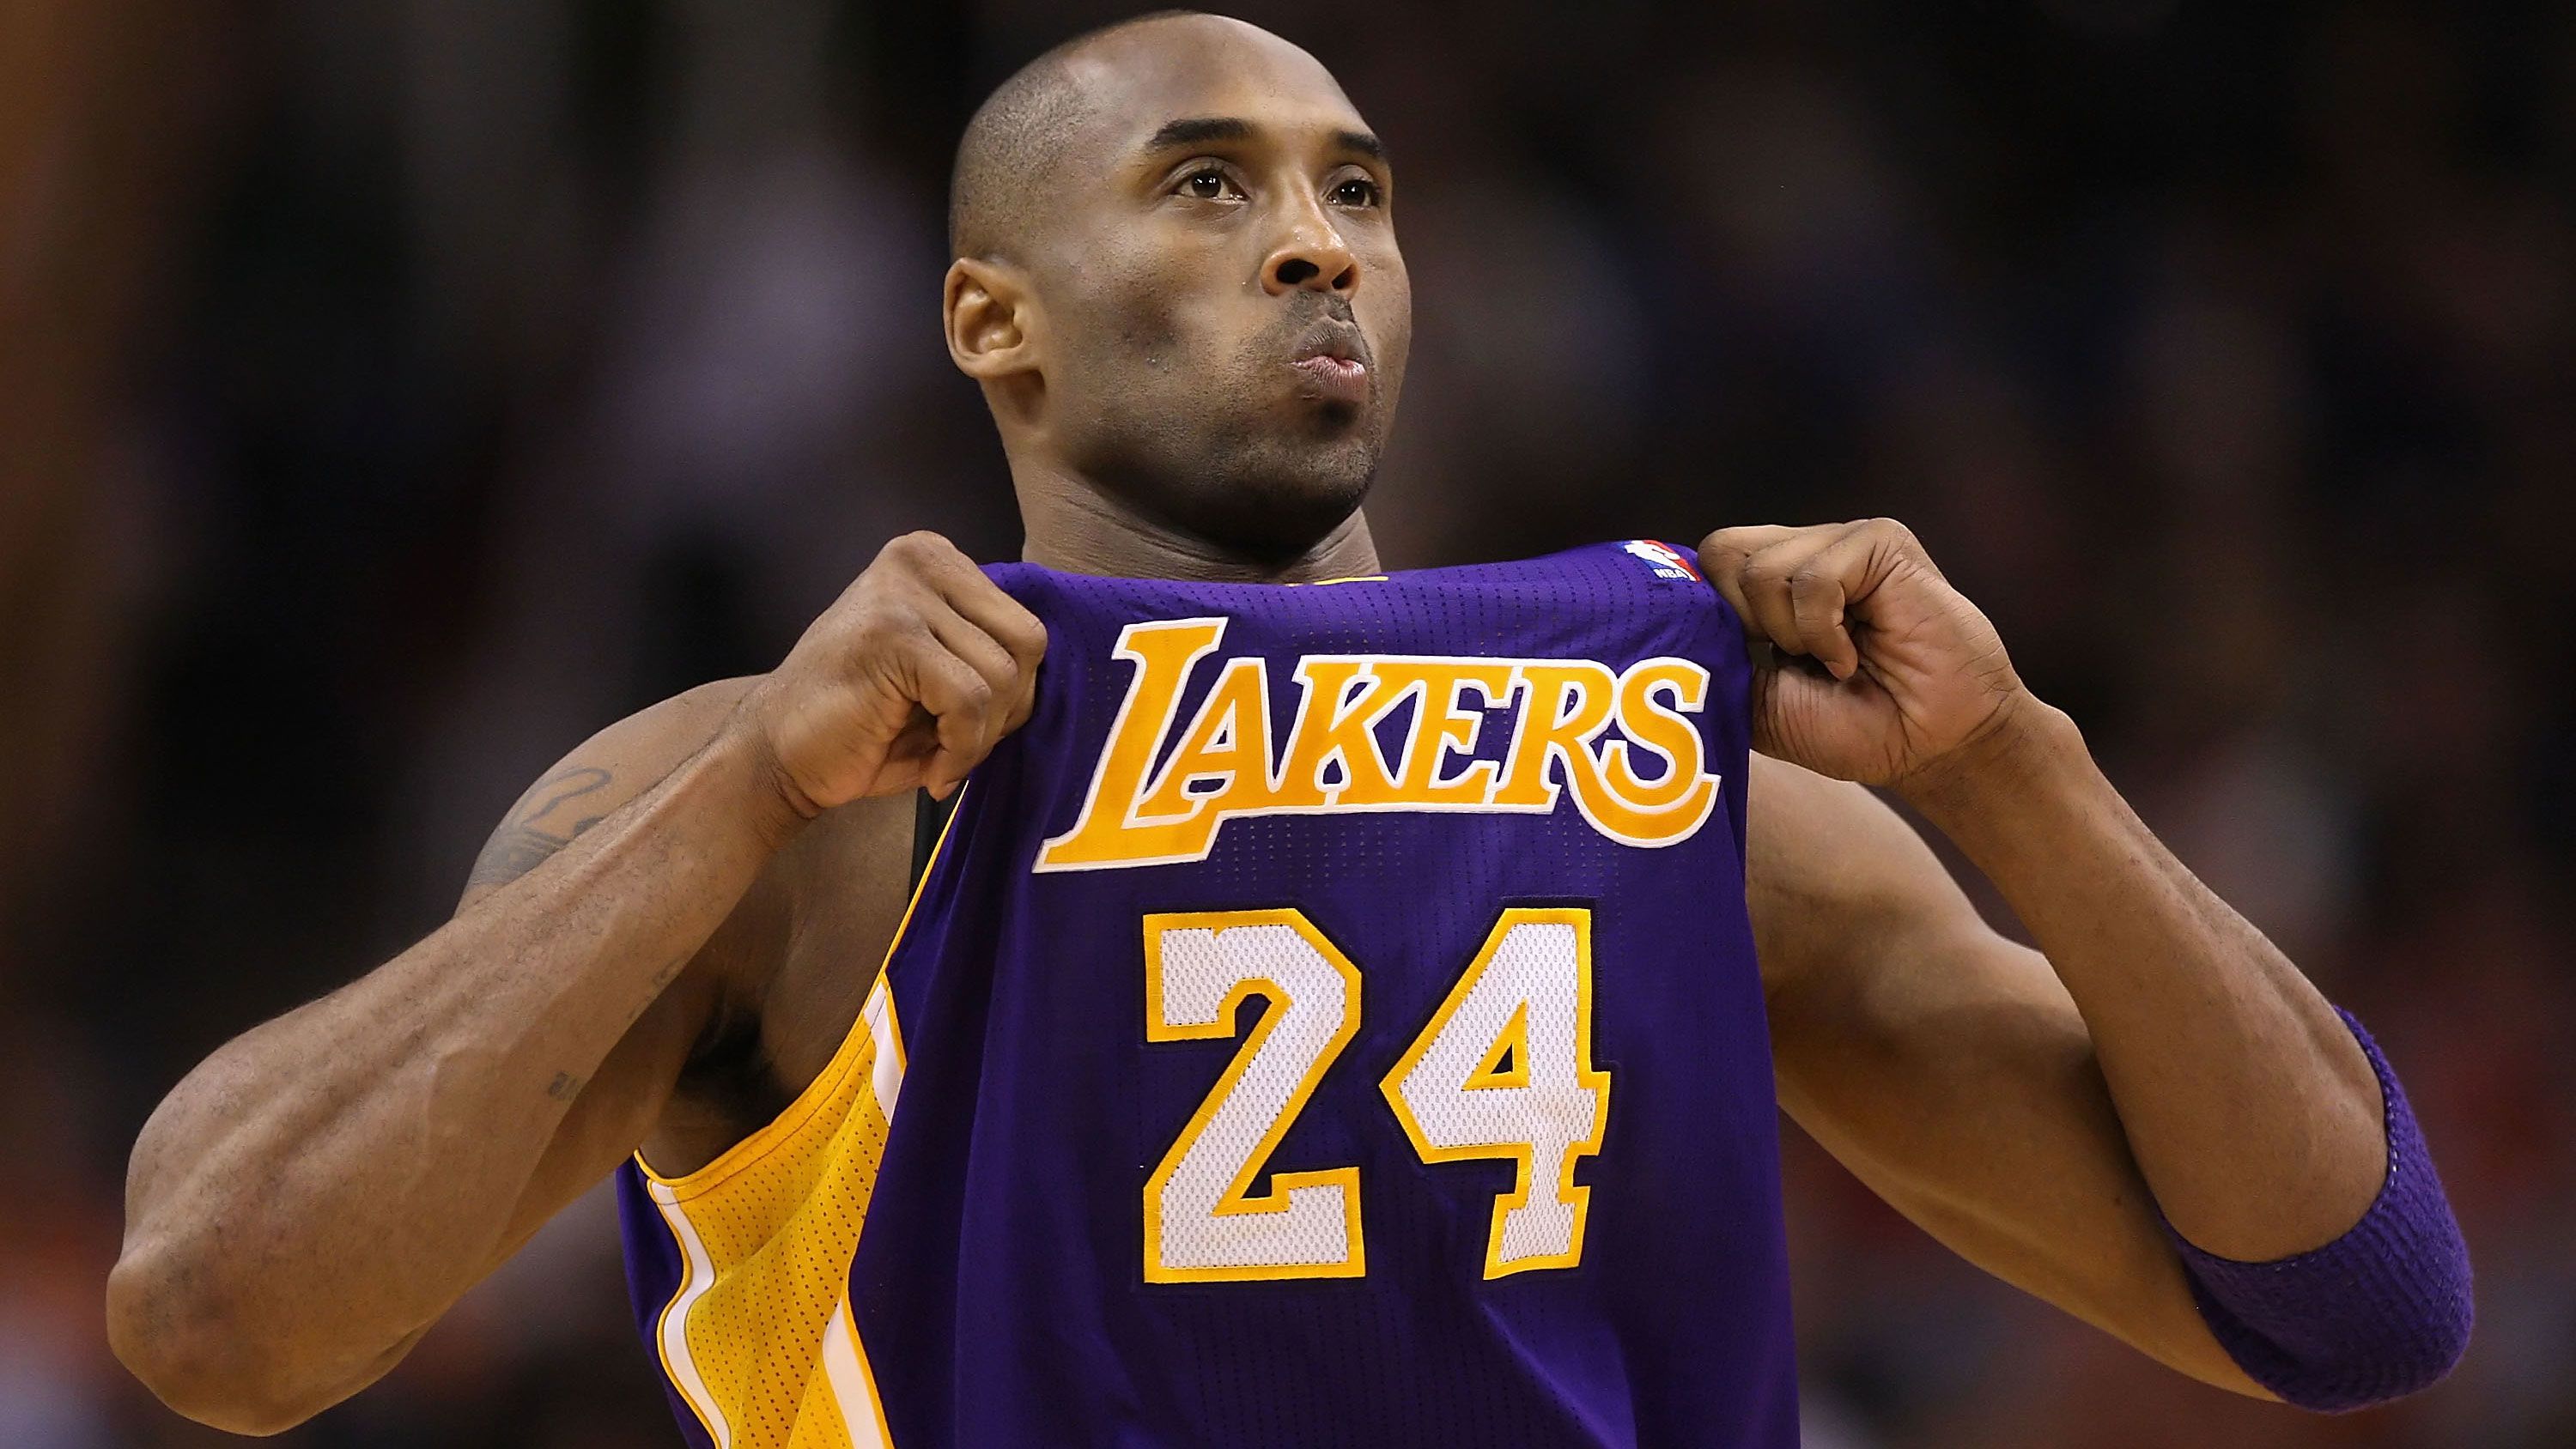 Kobe Bryant Discusses Life After Retirement from the NBA